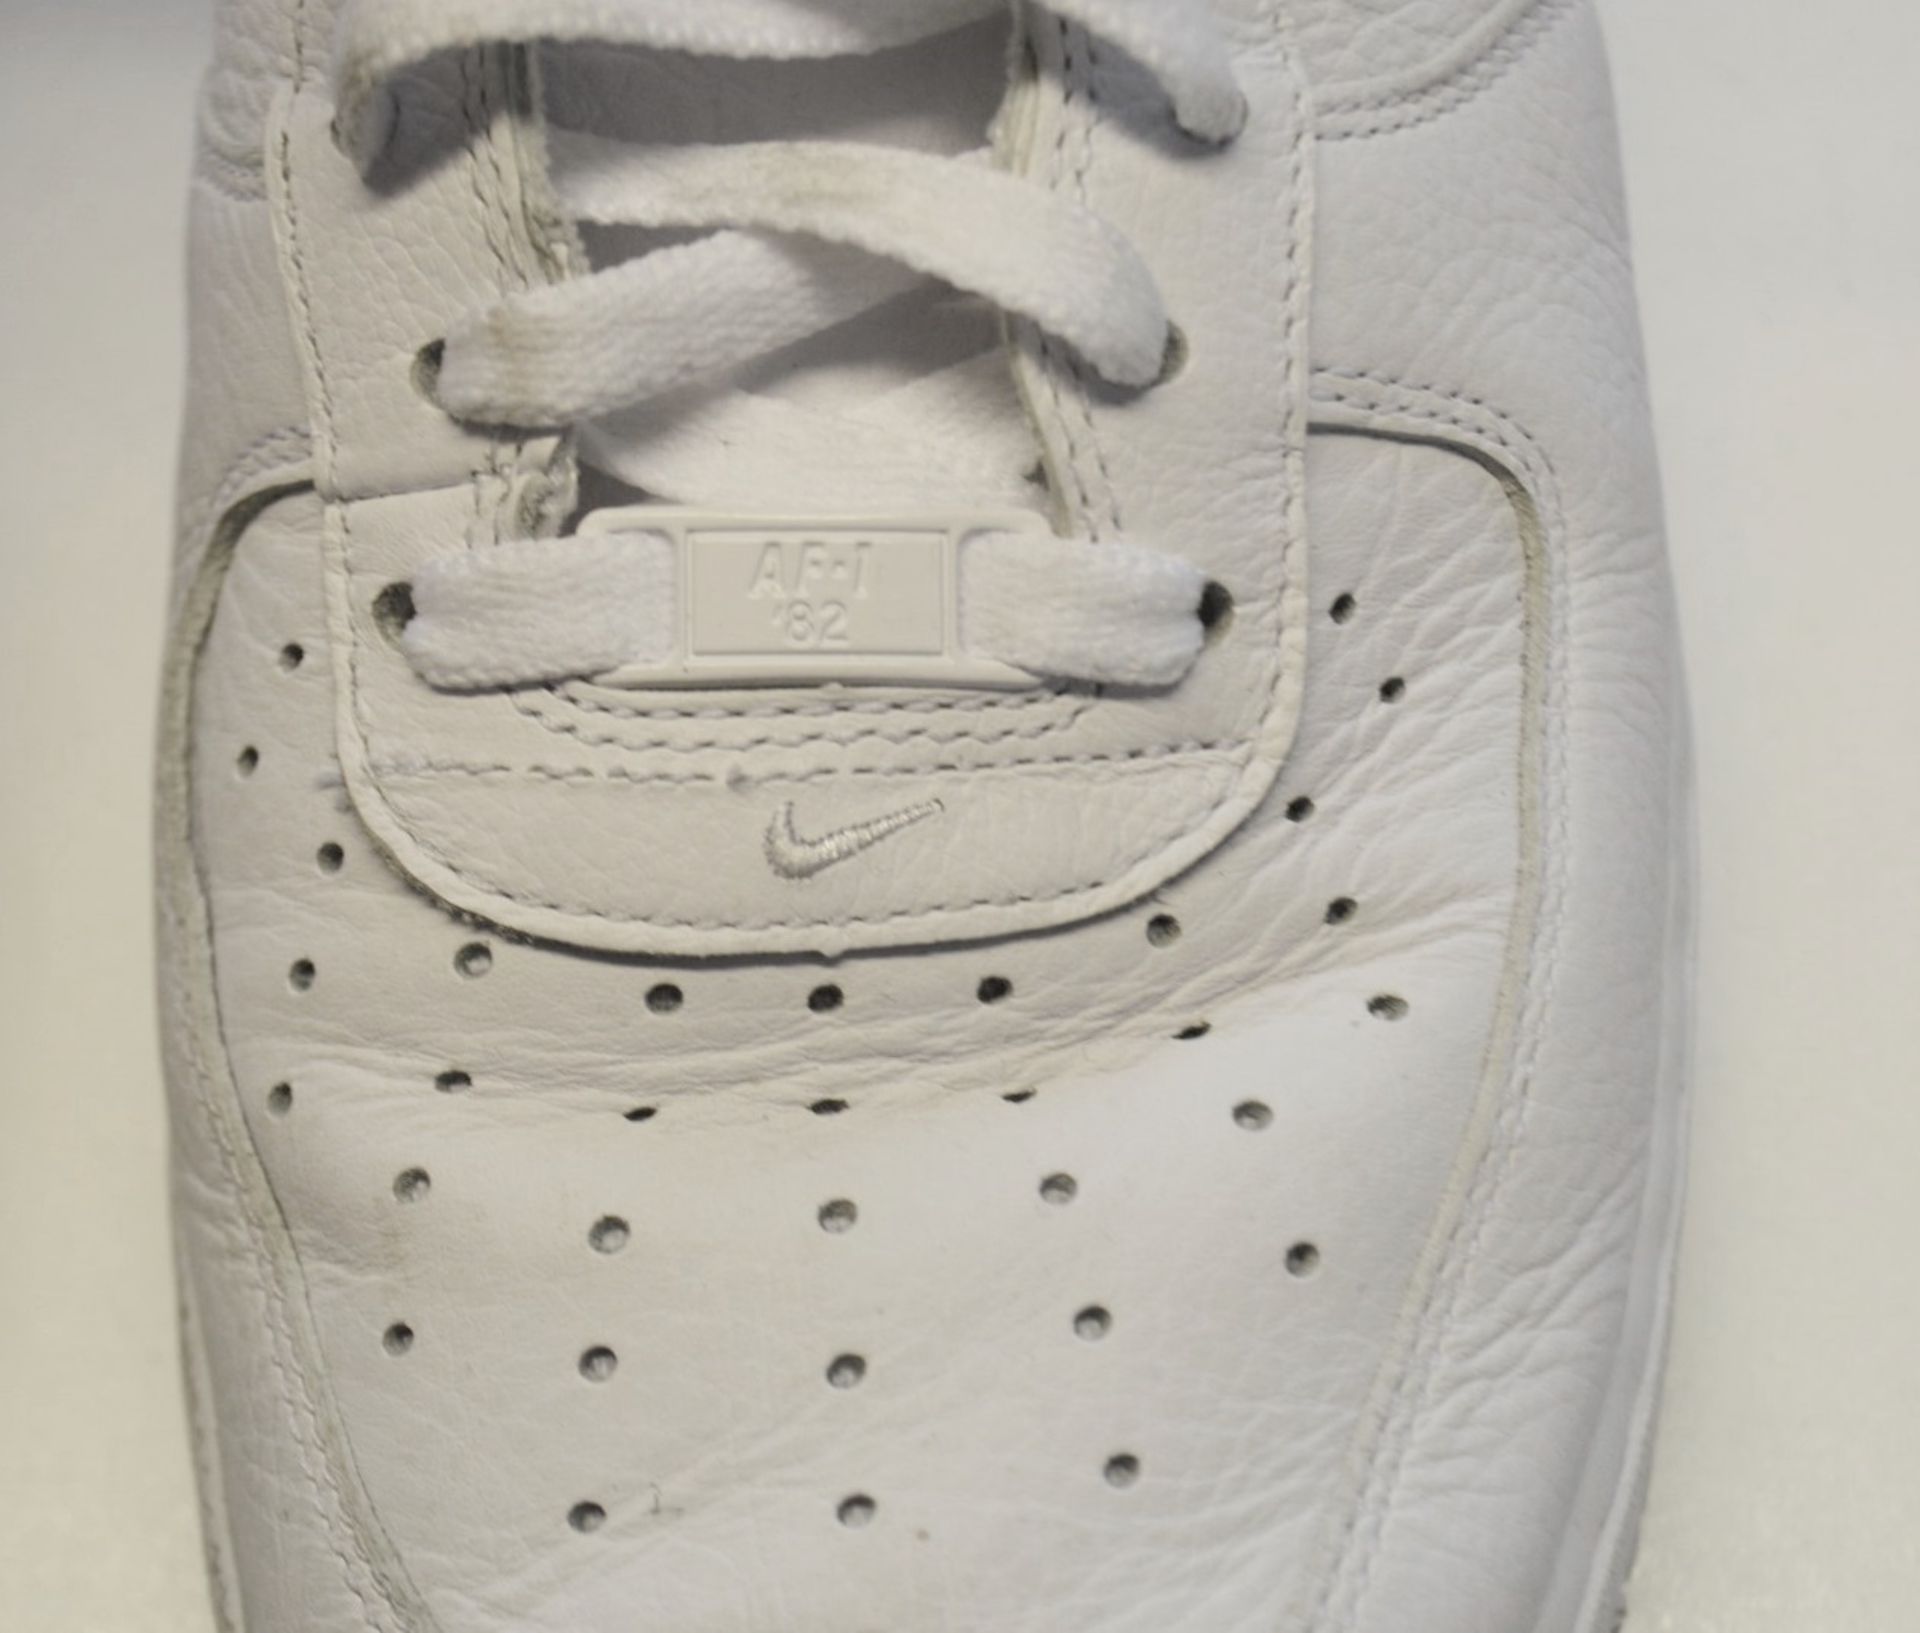 1 x Pair Of Men's Genuine Nike 'Air Force 1 Low' Trainers - Nikeconnect Nyc - Size (EU/UK): 45.5/ - Image 4 of 6